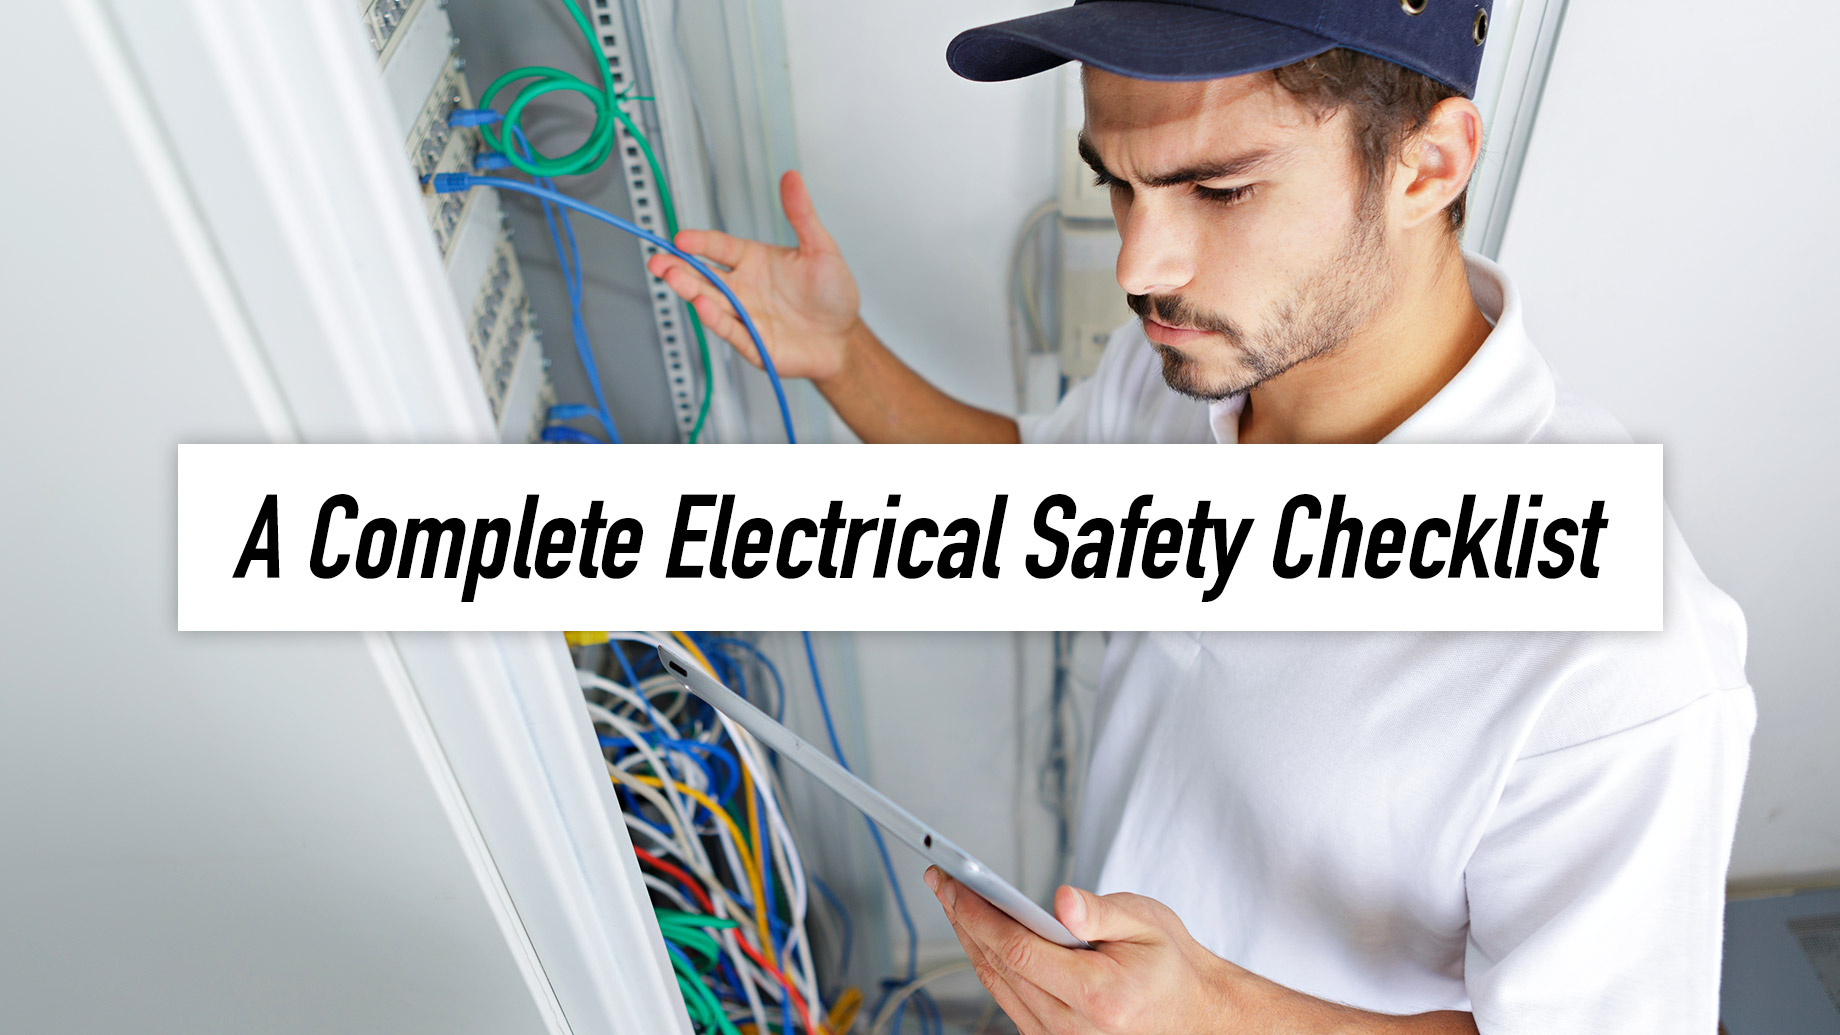 A Complete Electrical Safety Checklist